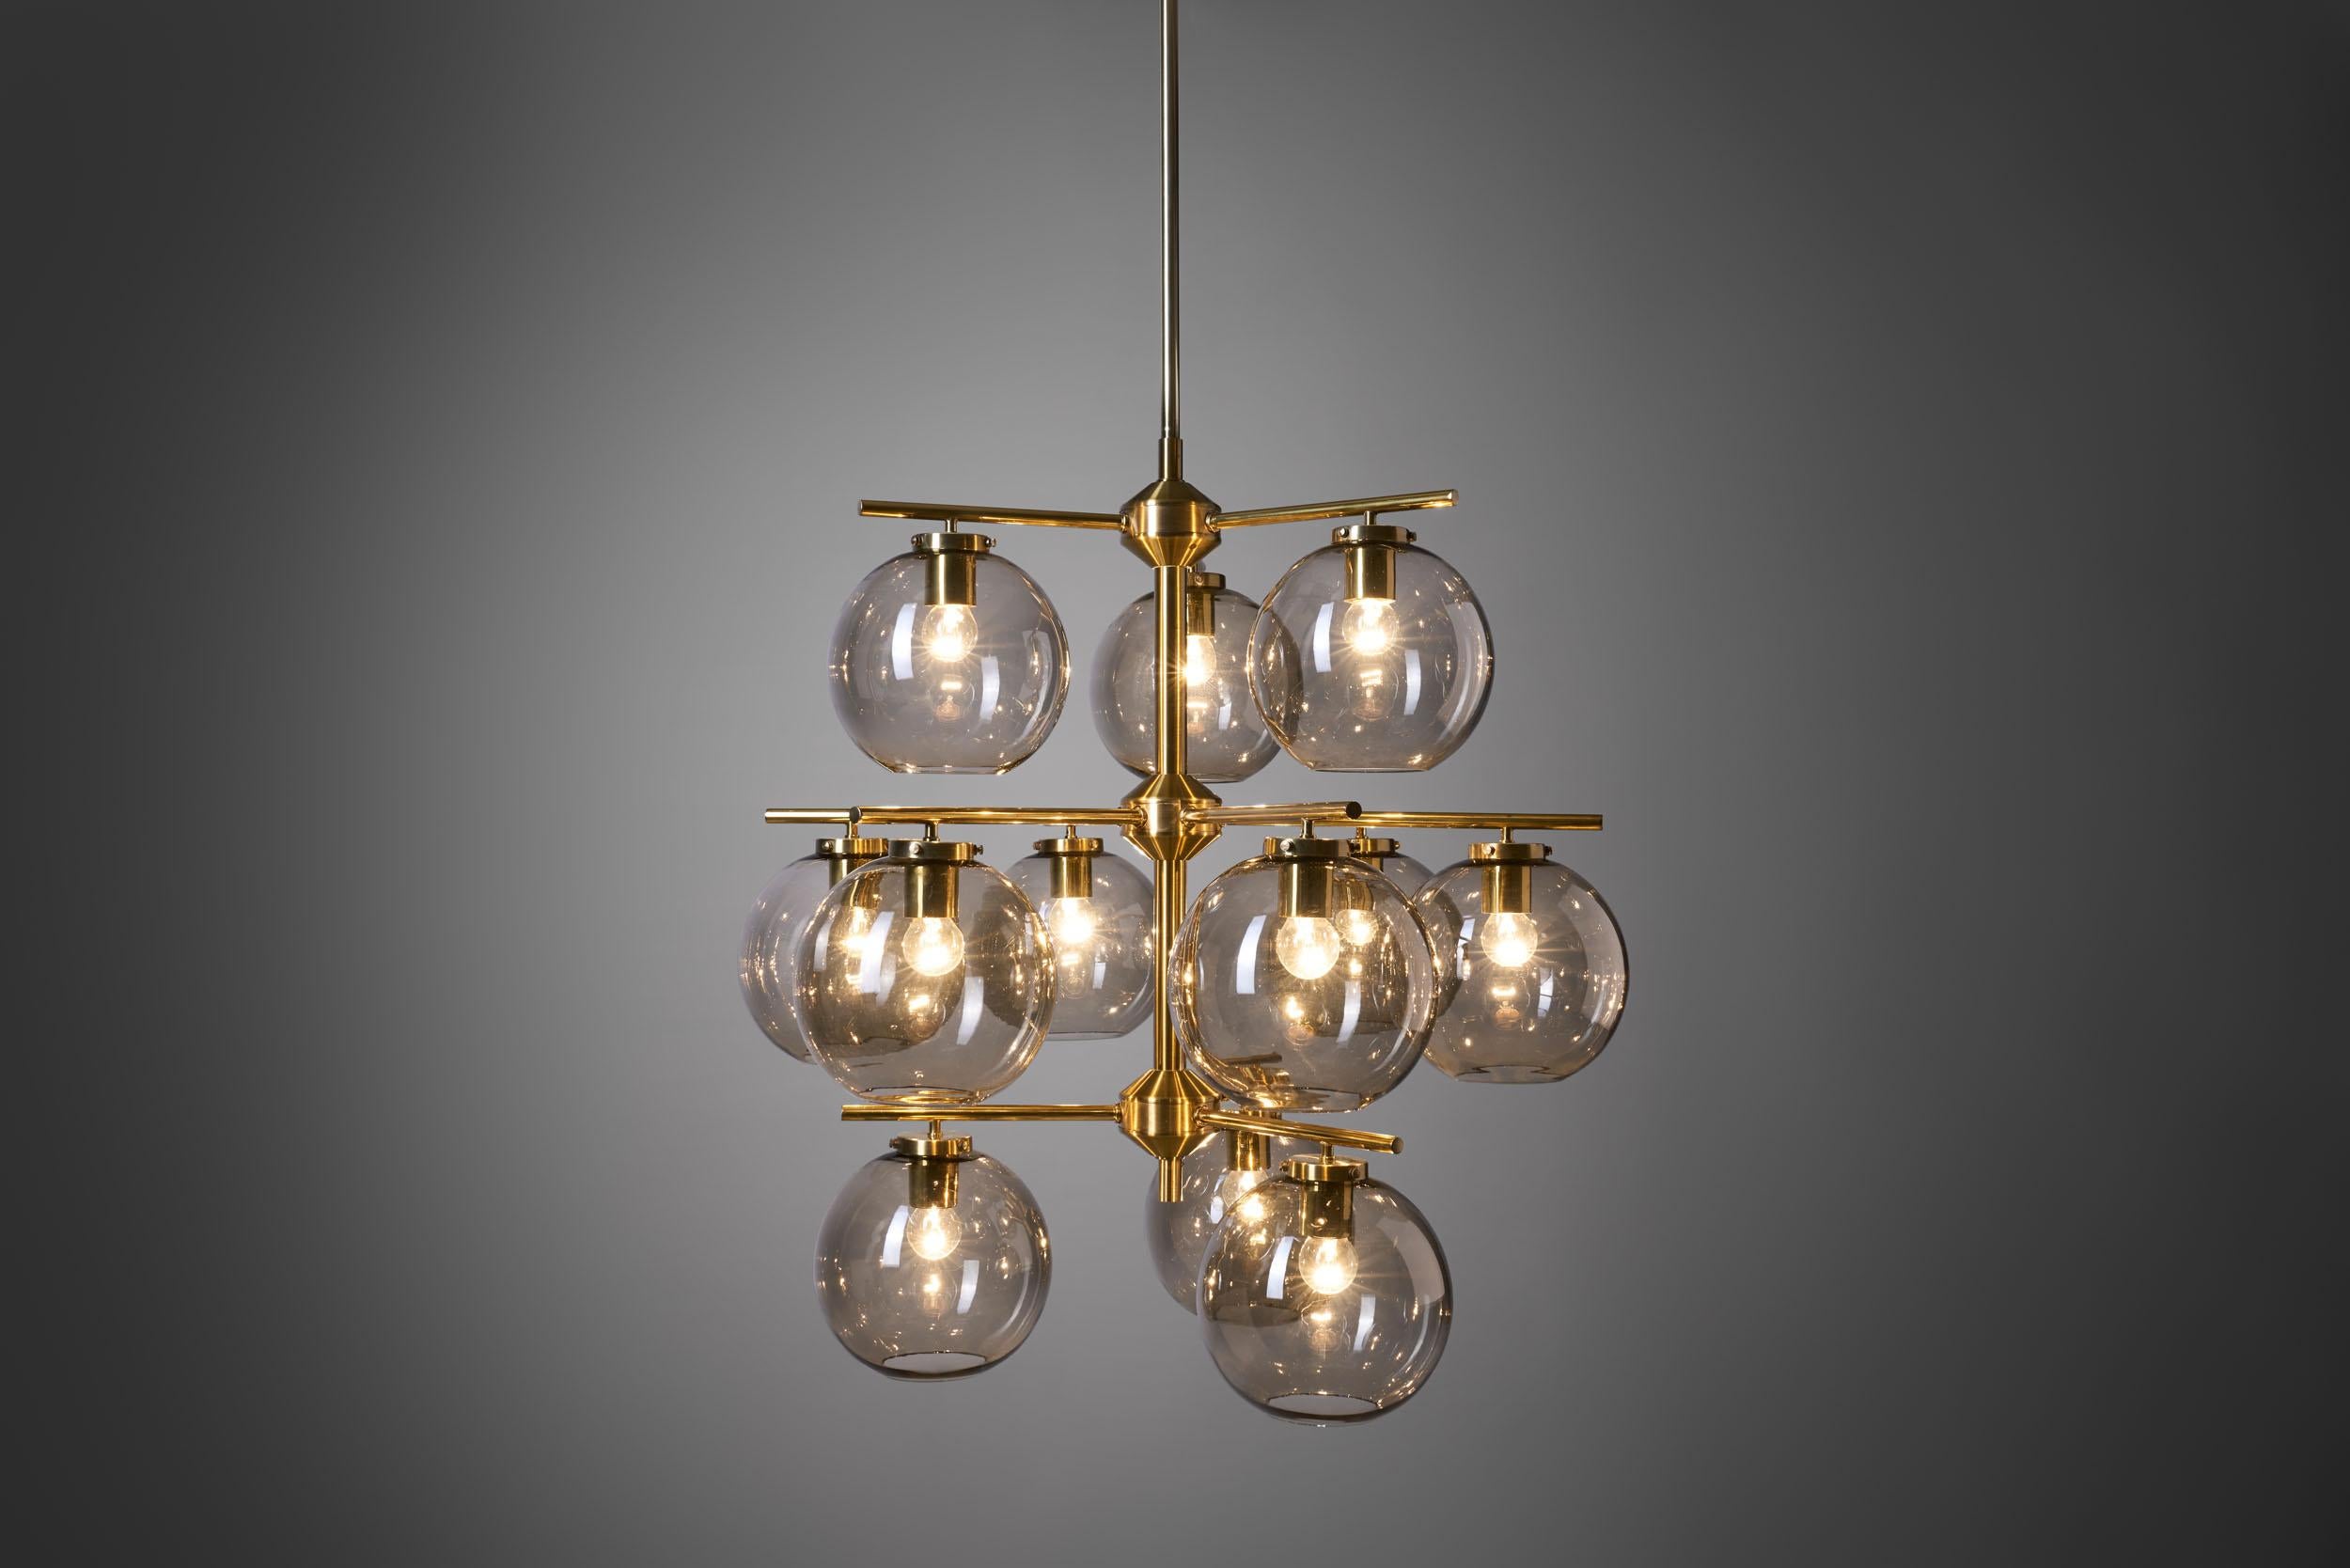 Mid-20th Century Holger Johansson Chandelier with 12 Smoked Glass Shades for Westal, Sweden 1960s